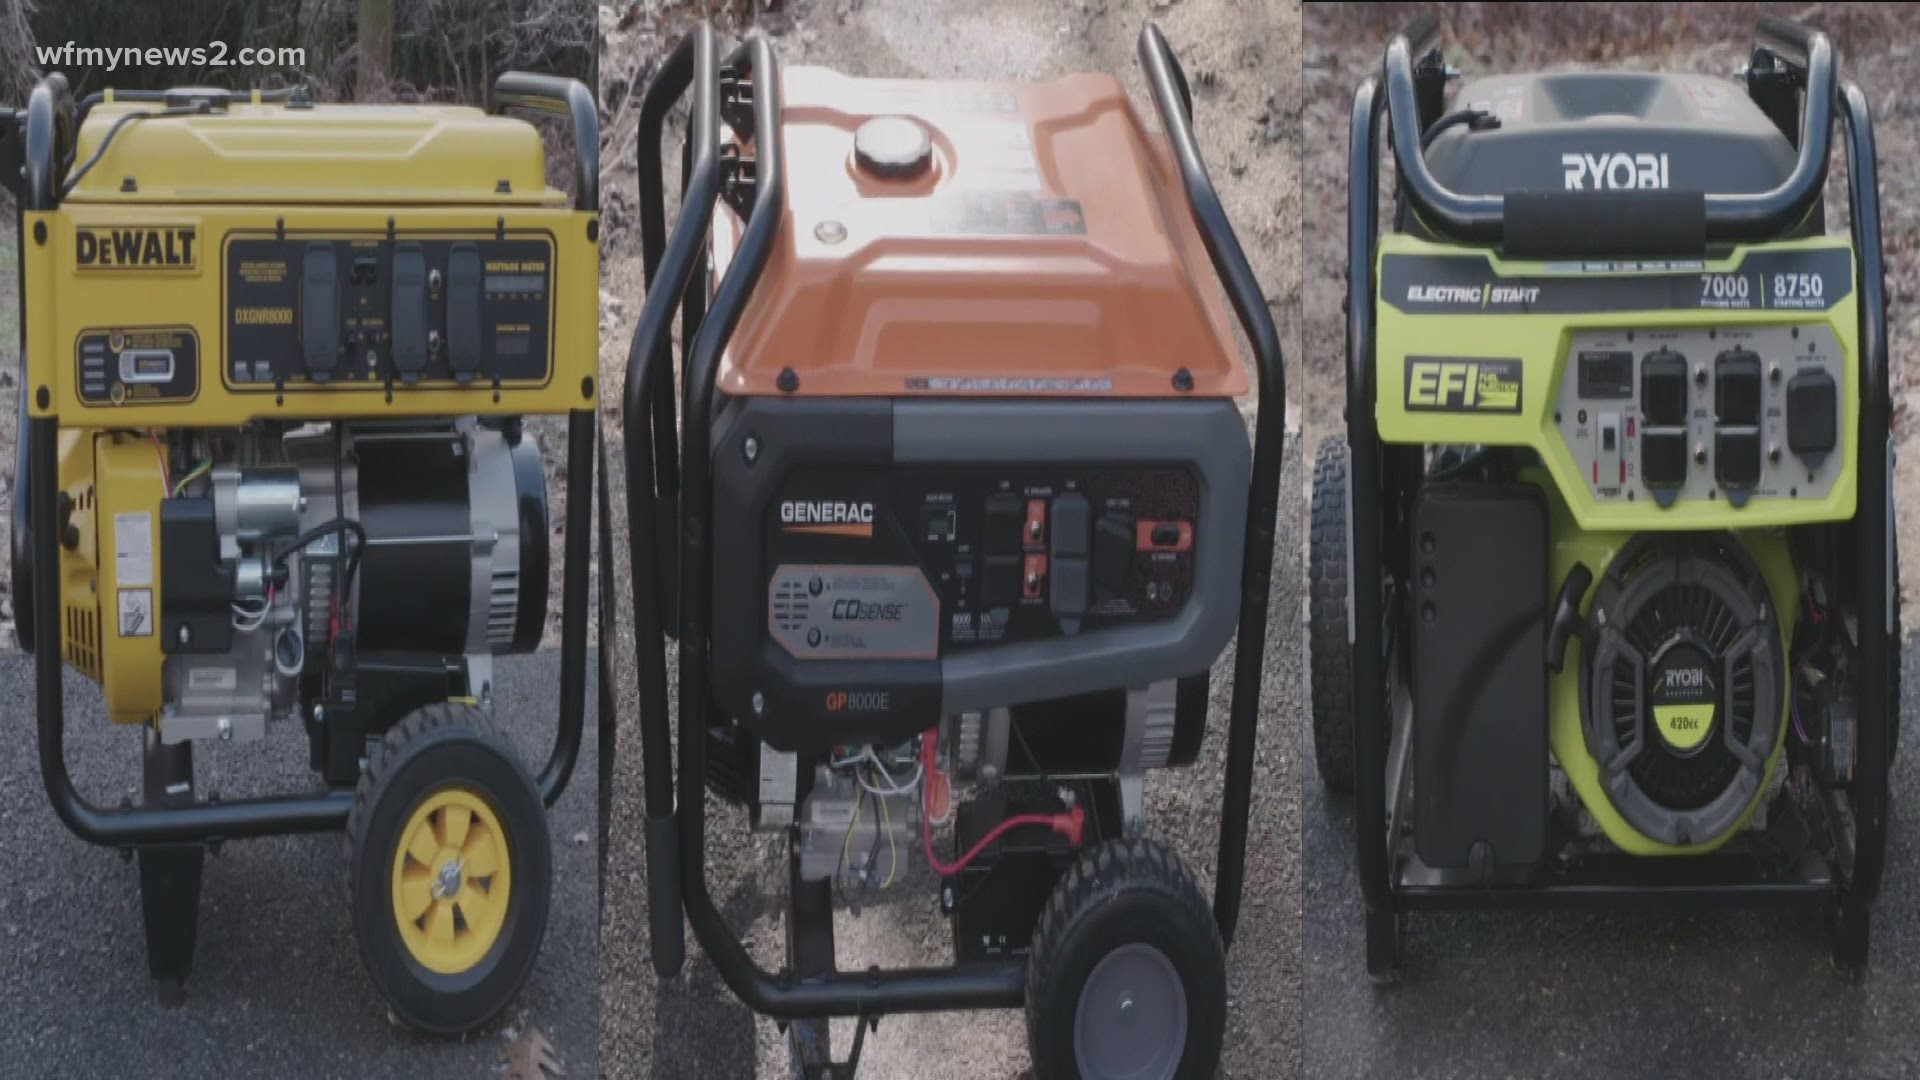 Generator sales increased following a weekend ice storm. There are ways to safely use a generator.